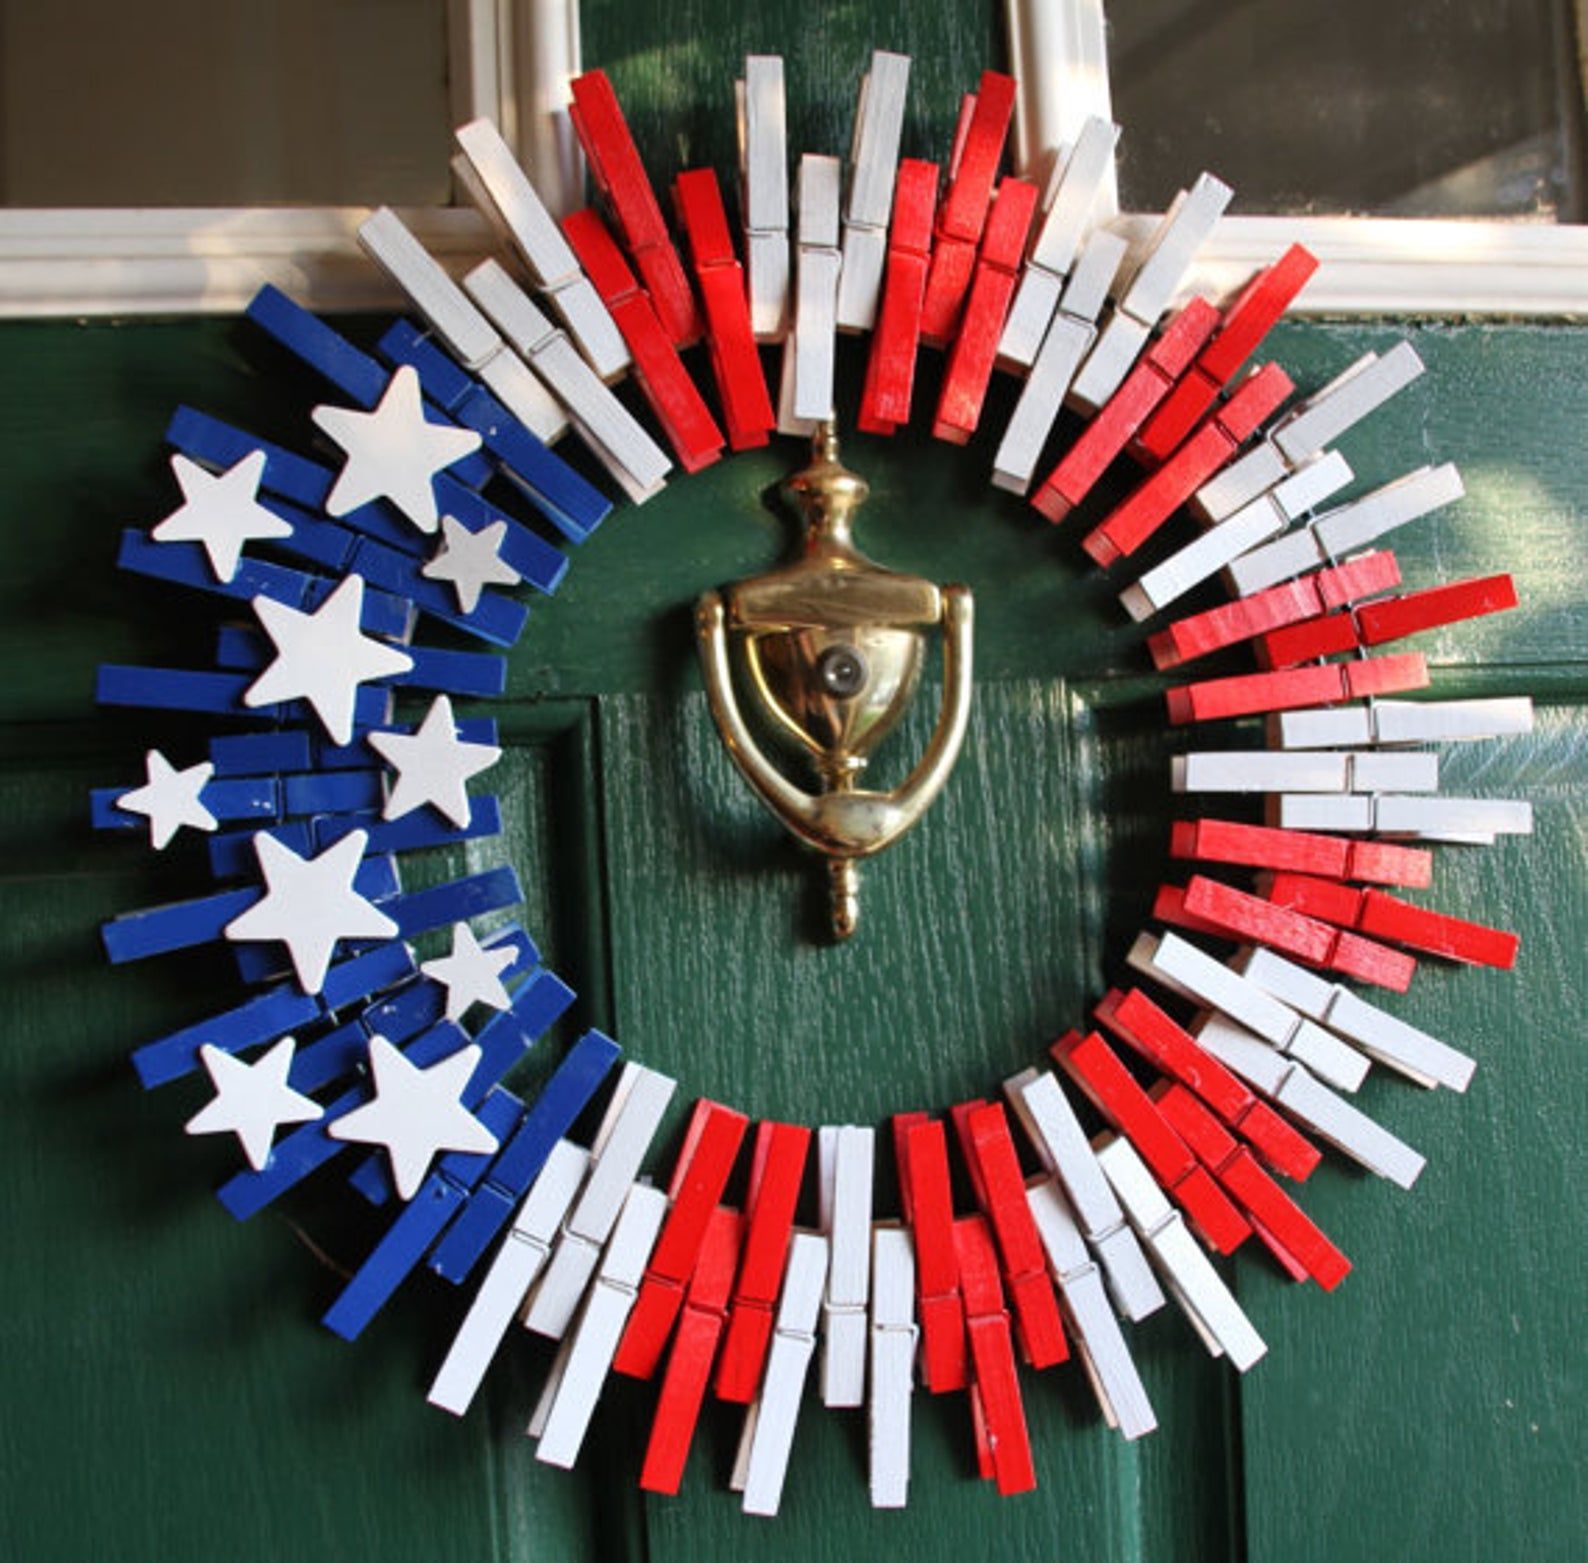 4th July Wreath - Patriotic Wreath - Fourth of July Wreath - American Flag Wreath - Veterans Day Wreath - Americana - Stars and Stripes -   19 holiday Wreaths 4th of july ideas